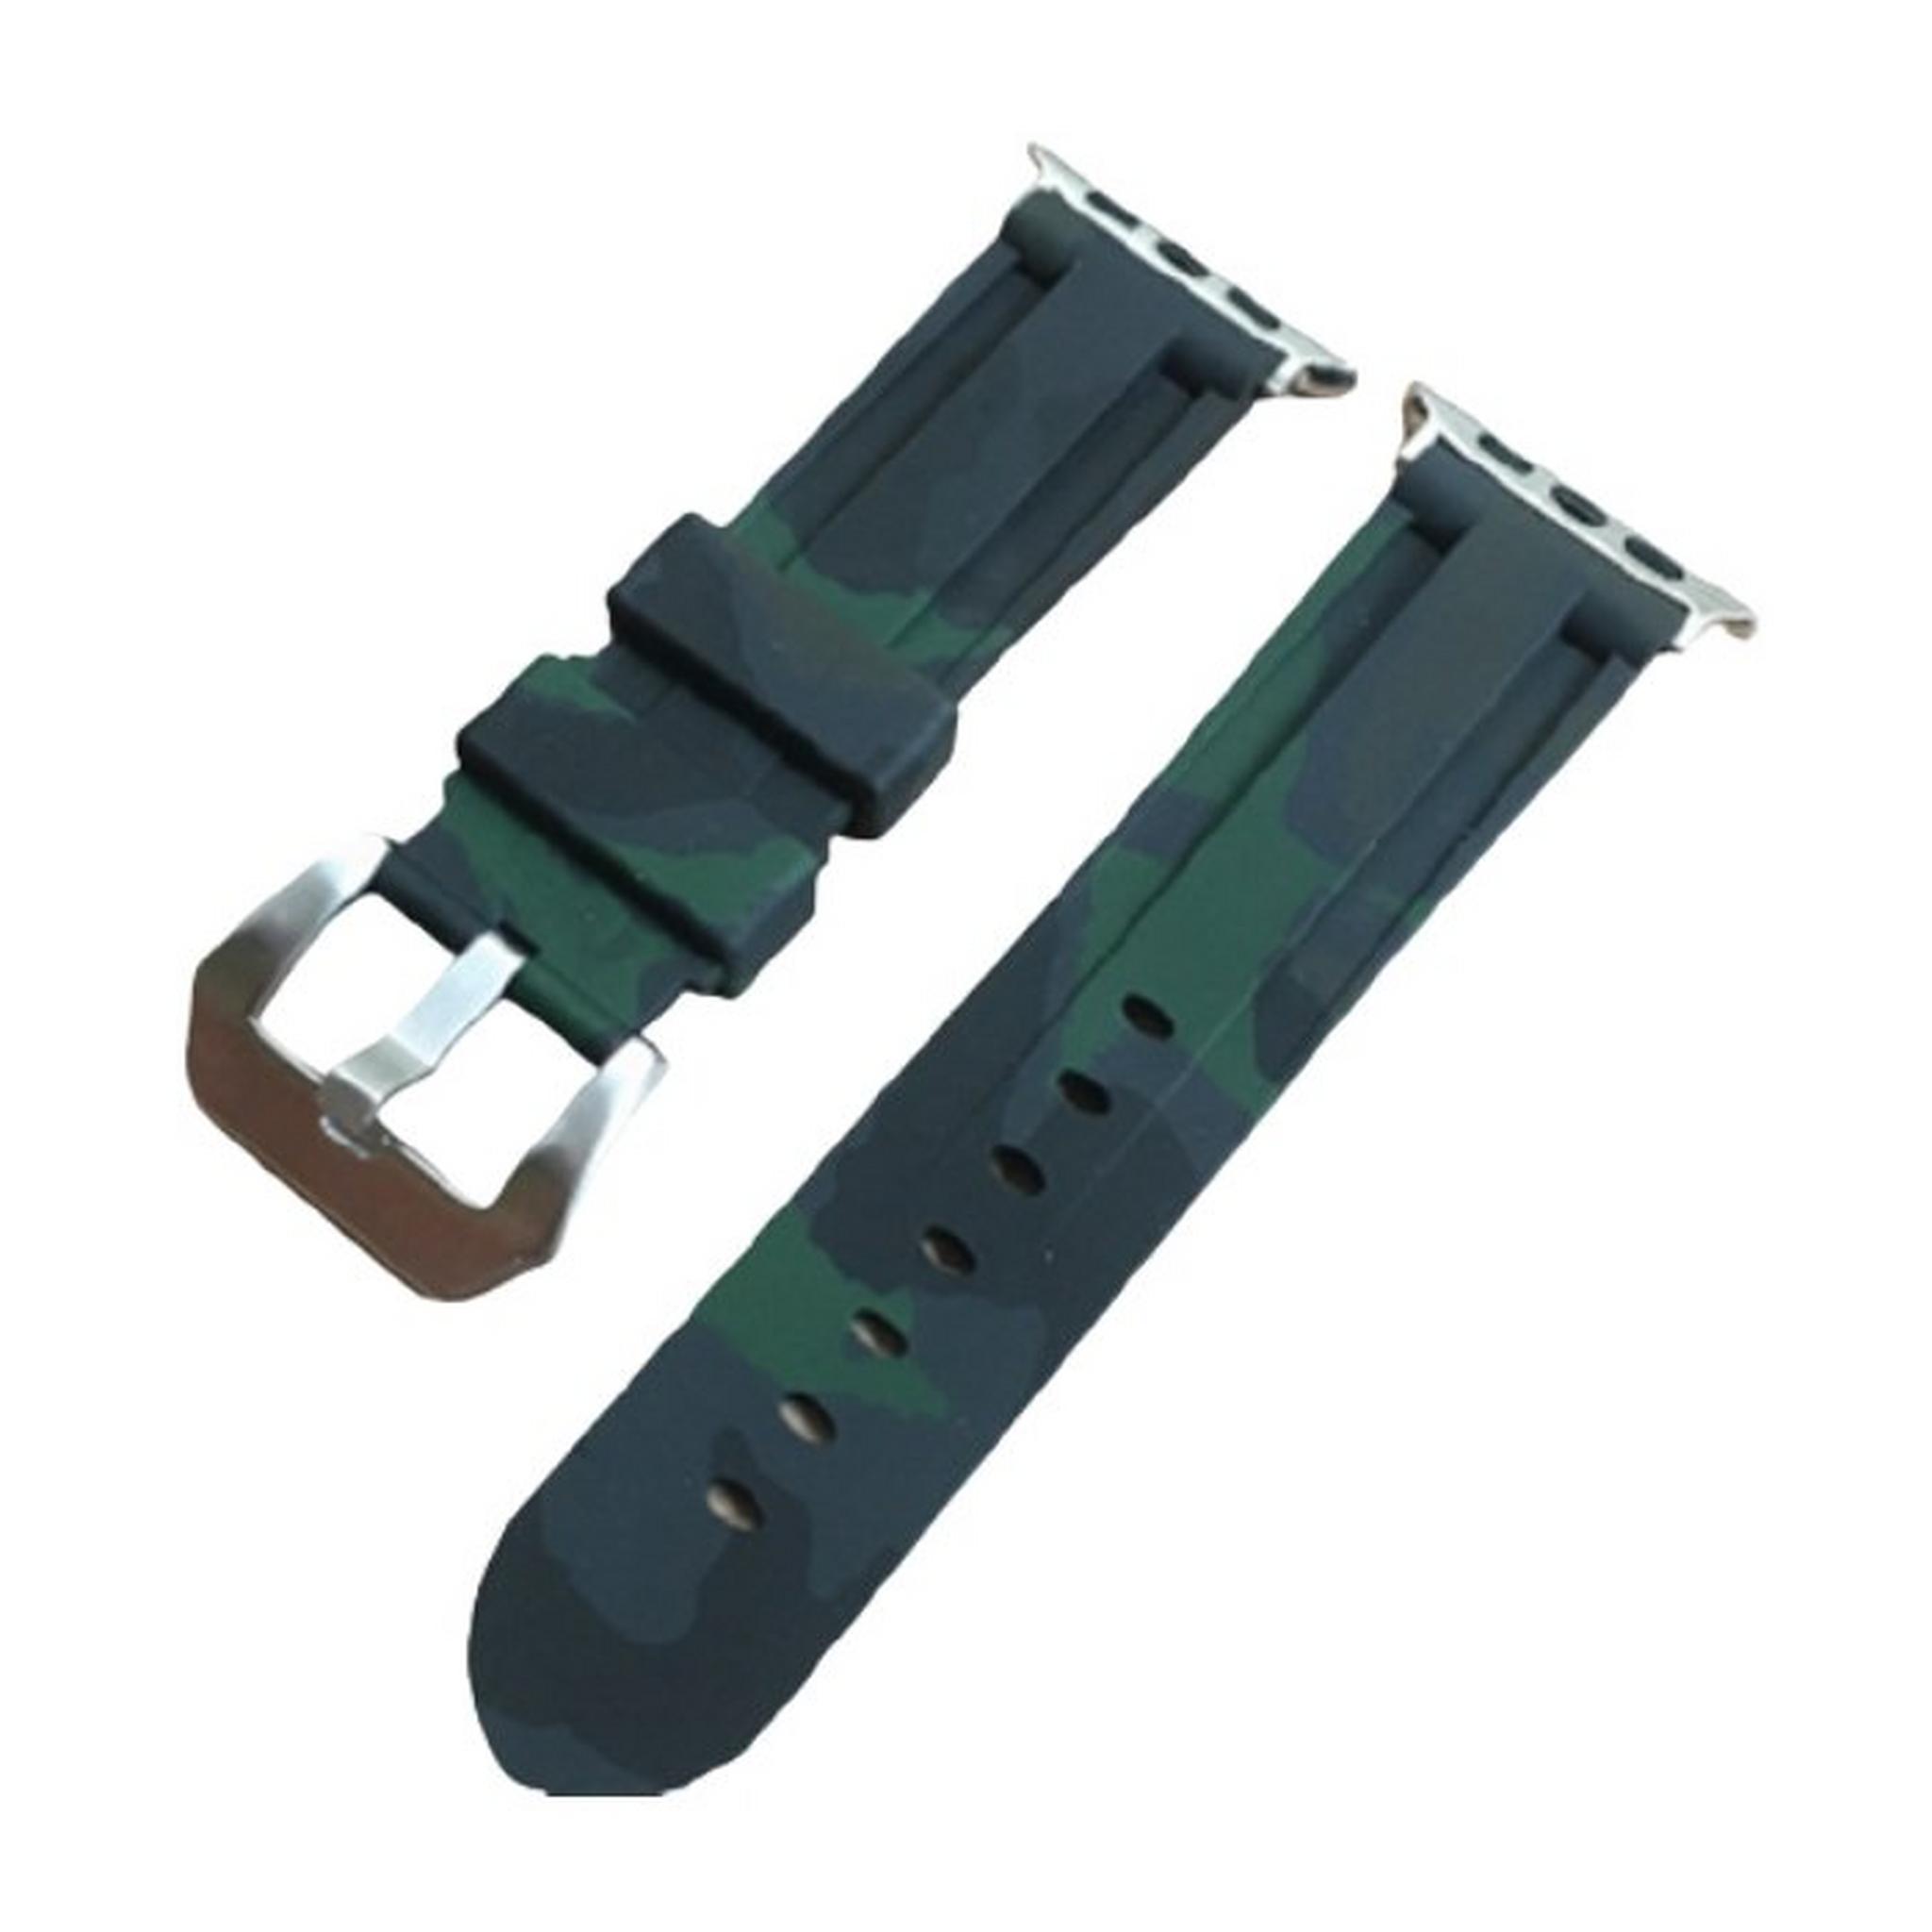 EQ Apple Watch Band Size 38/40MM (Camouflage) - Green